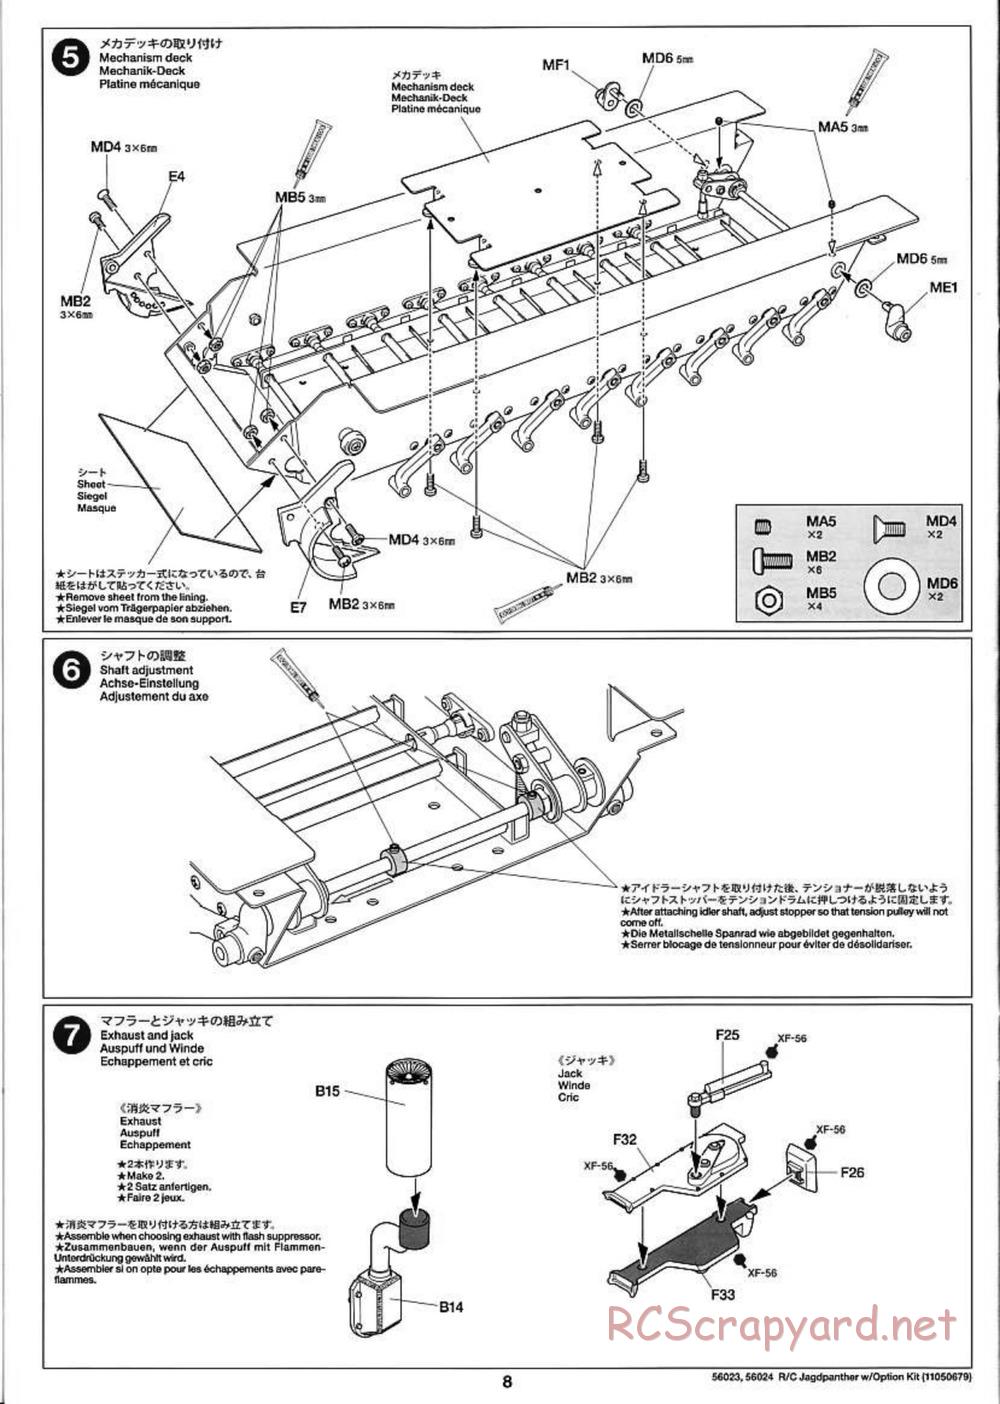 Tamiya - Jagdpanther - 1/16 Scale Chassis - Manual - Page 8